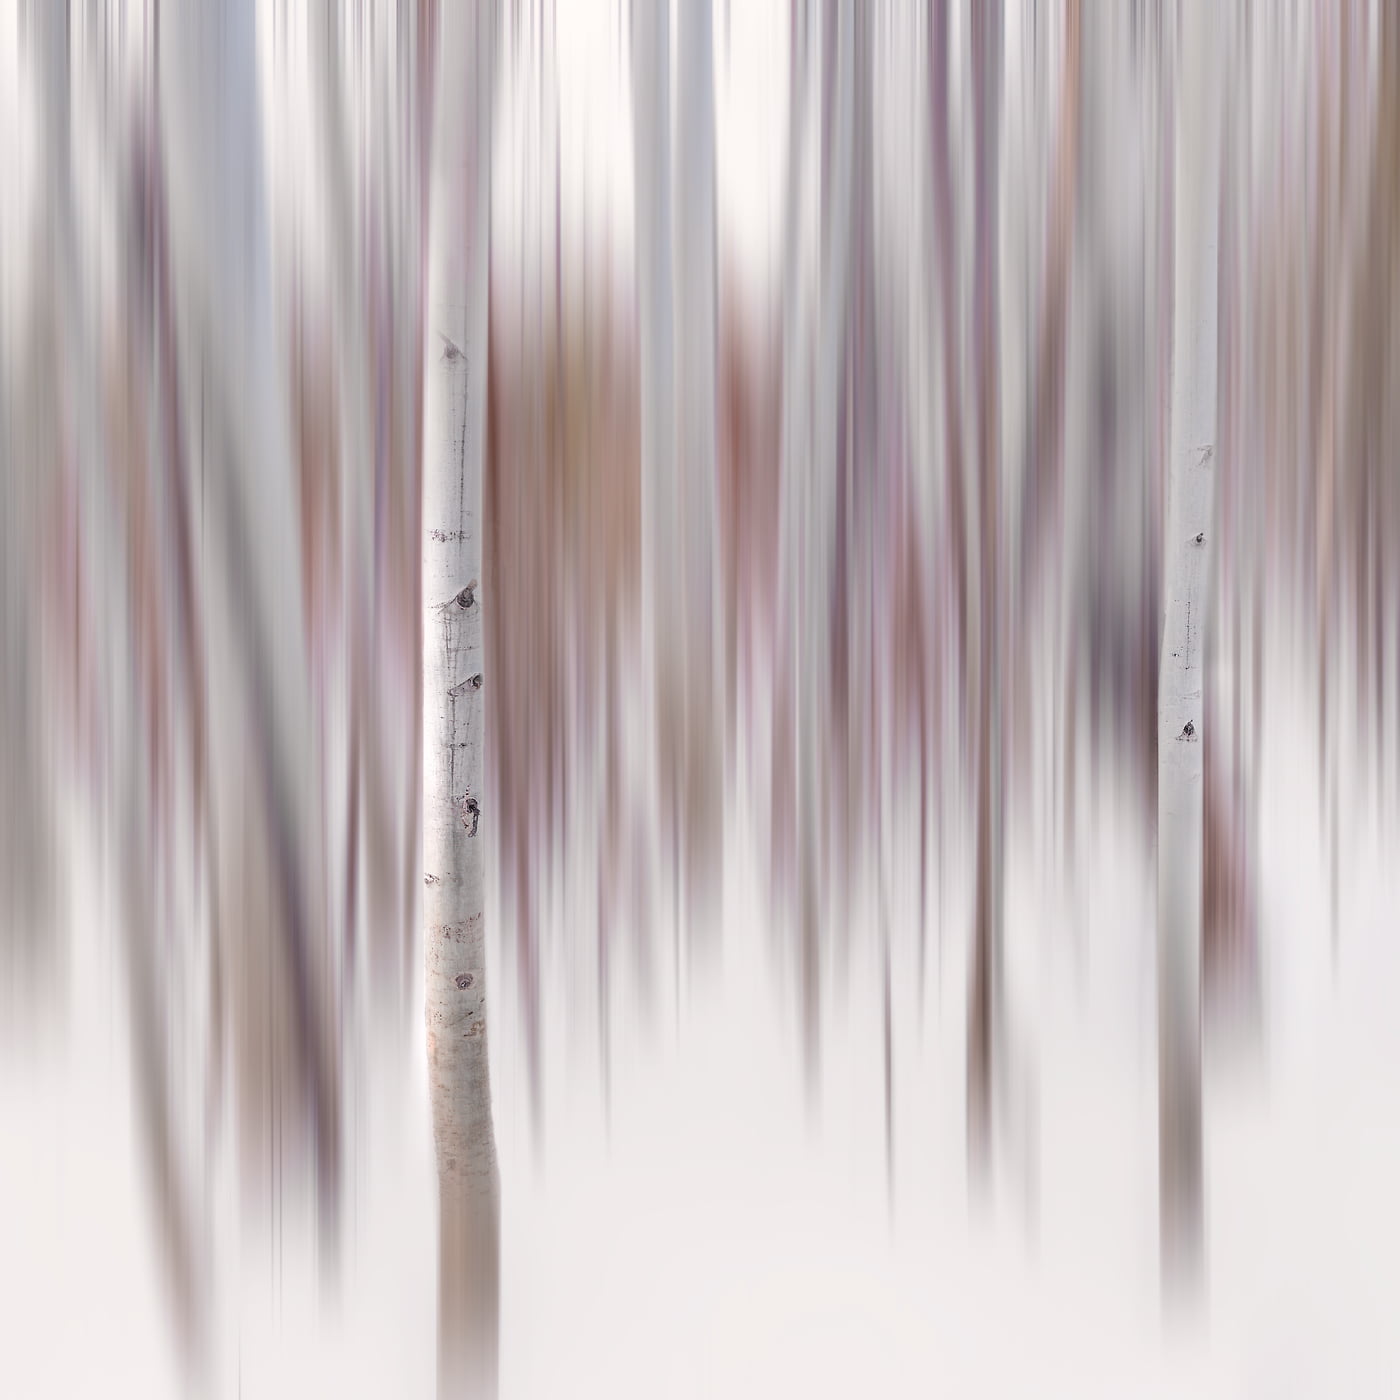 225 megapixels! A very high resolution, abstract photo of a grove of aspen trees; abstract nature photograph created by Francesco Emanuele Carucci